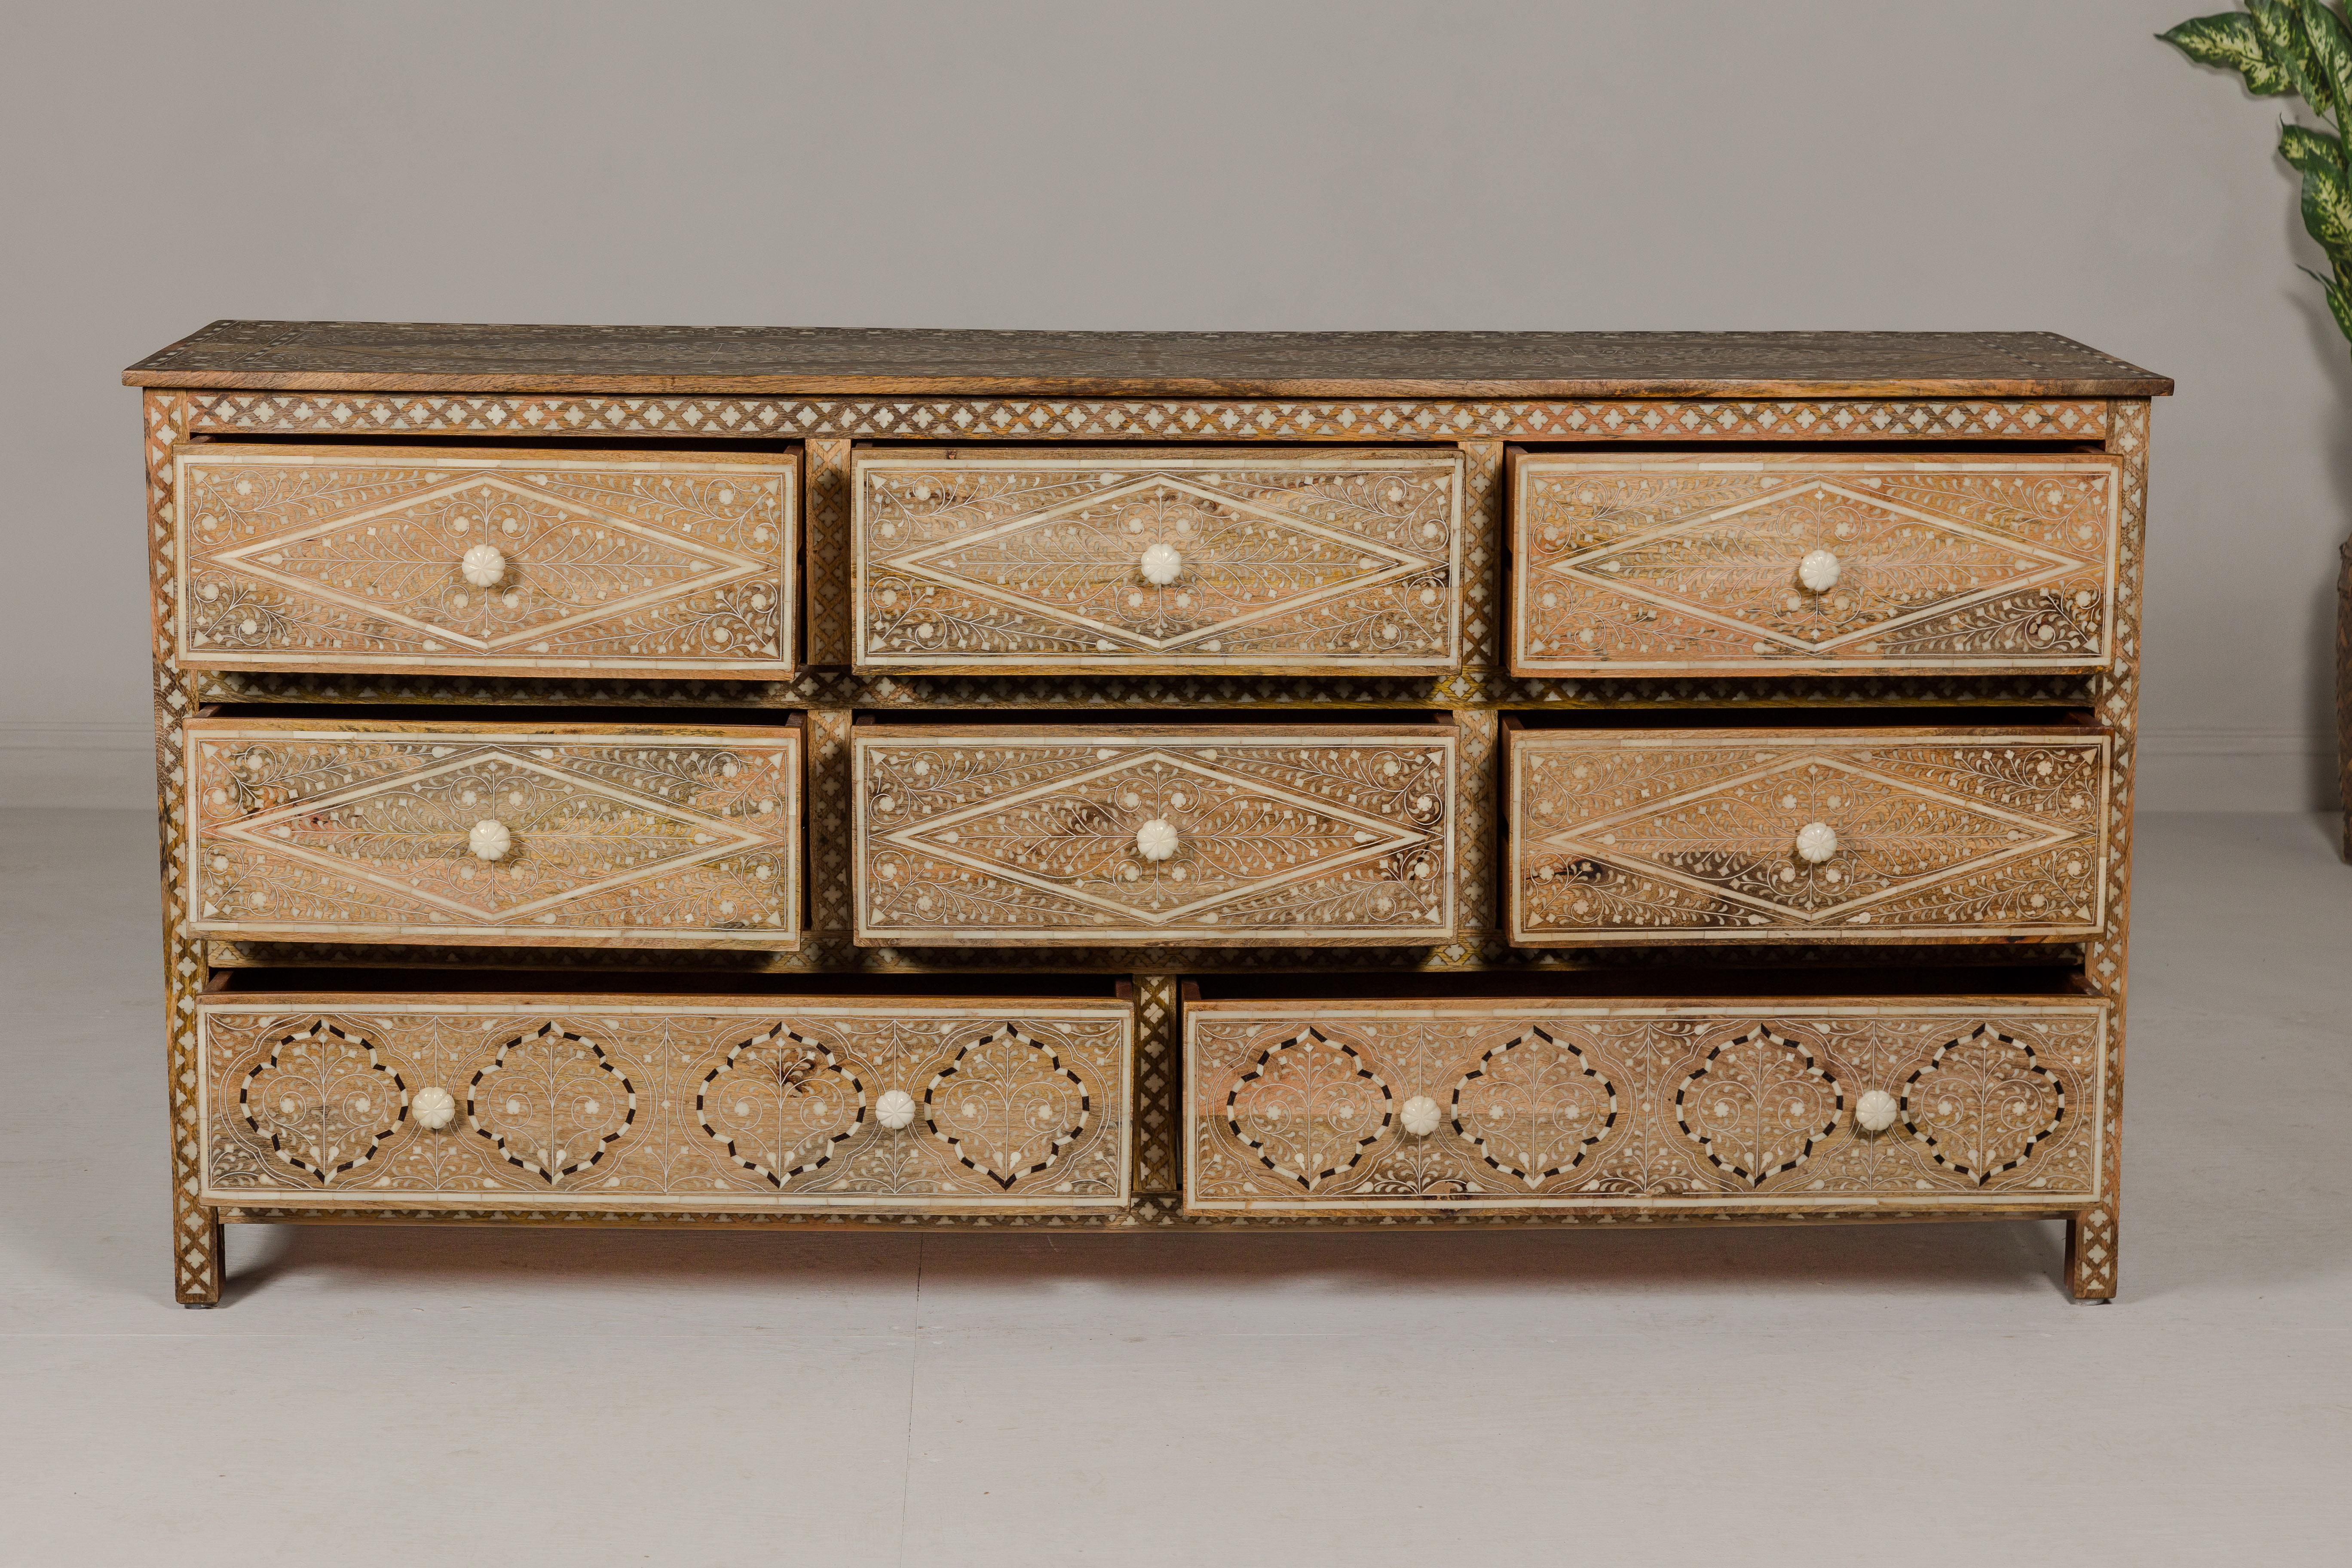 Anglo-Indian Style Mango Wood Dresser with Eight Drawers and Floral Bone Inlay 6